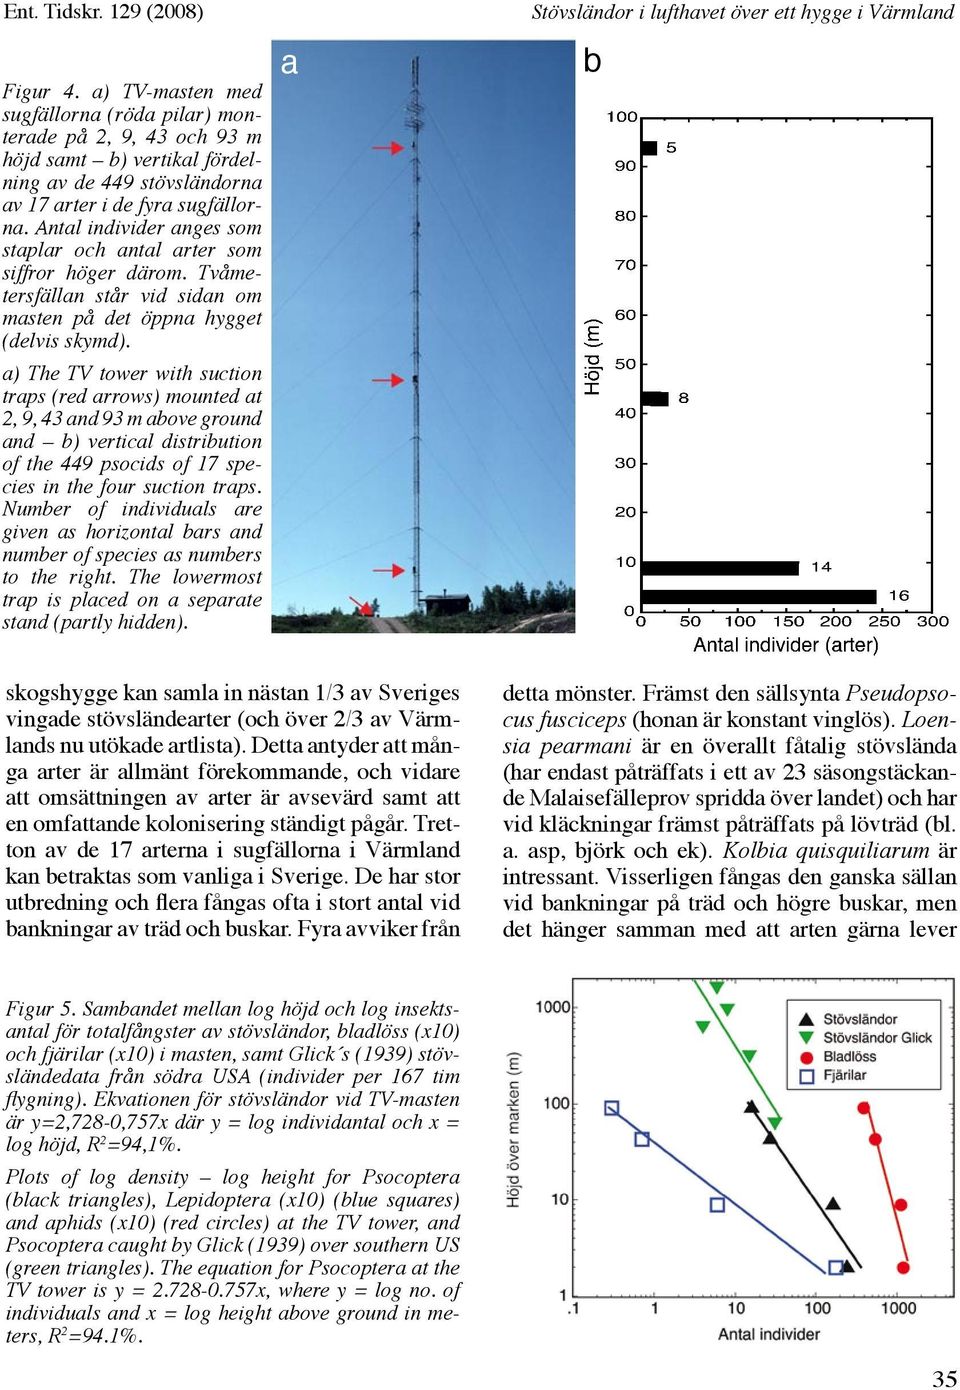 a) The TV tower with suction traps (red arrows) mounted at 2, 9, 43 and 93 m above ground and b) vertical distribution of the 449 psocids of 17 species in the four suction traps.